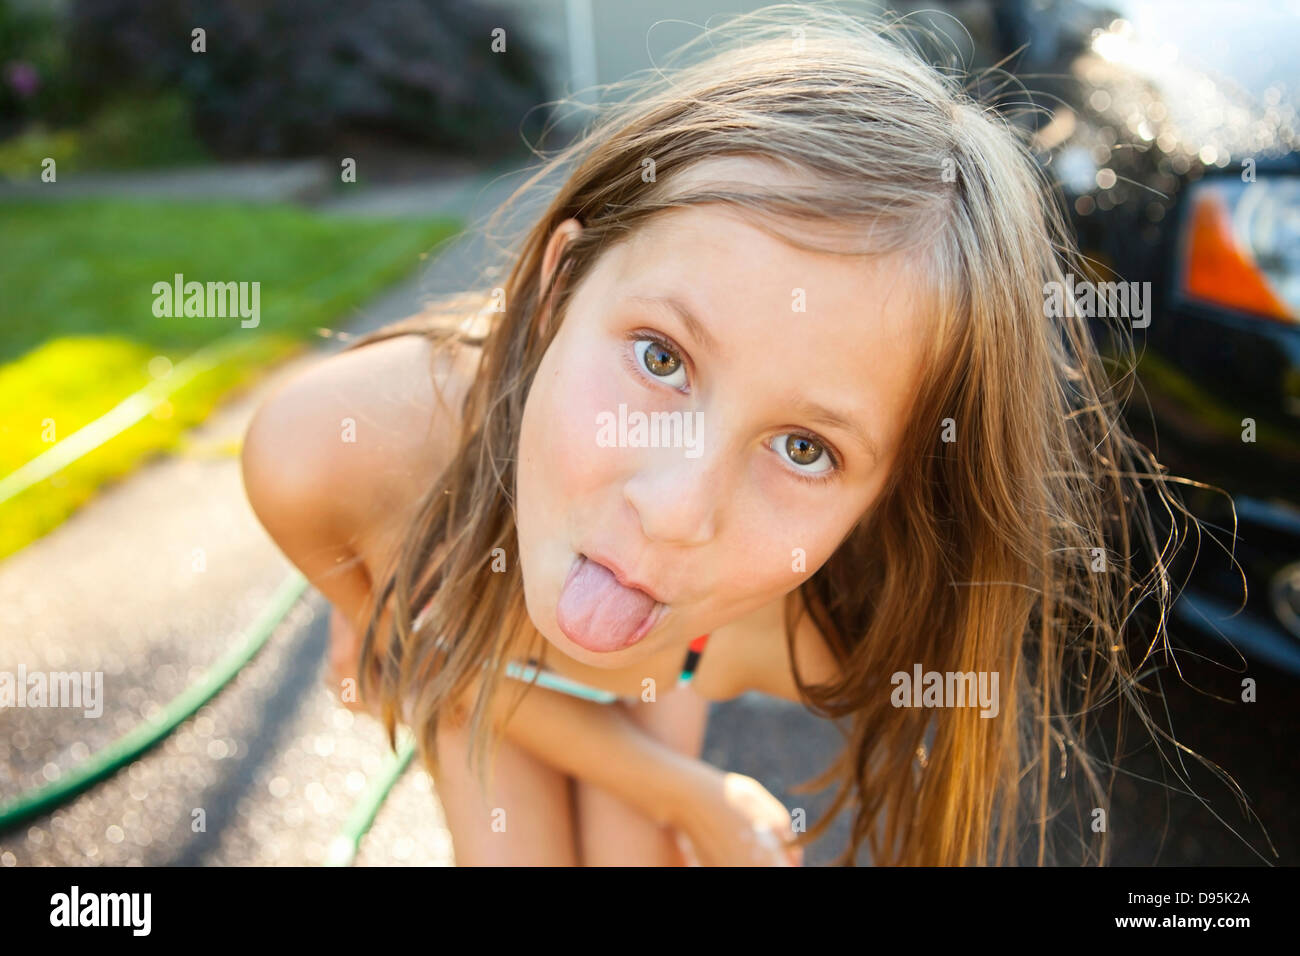 Portrait young girl sticking her tongue out while washing car in driveway their home on sunny summer afternoon in Portland Stock Photo